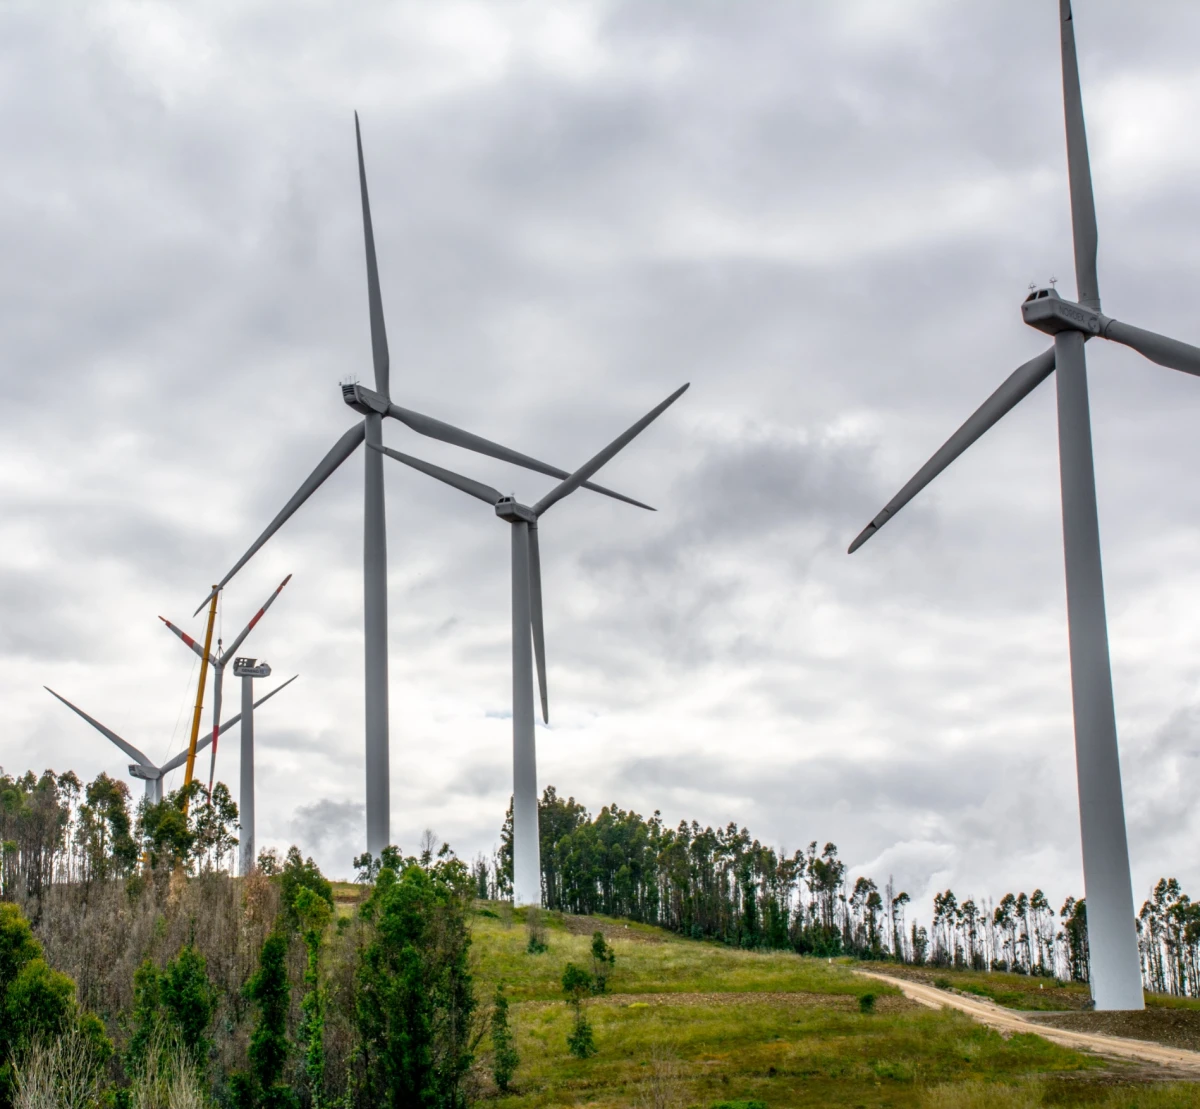 The Lagoa Funda Wind Farm, in Vila do Bispo, was the first to be dismantled in Portugal.